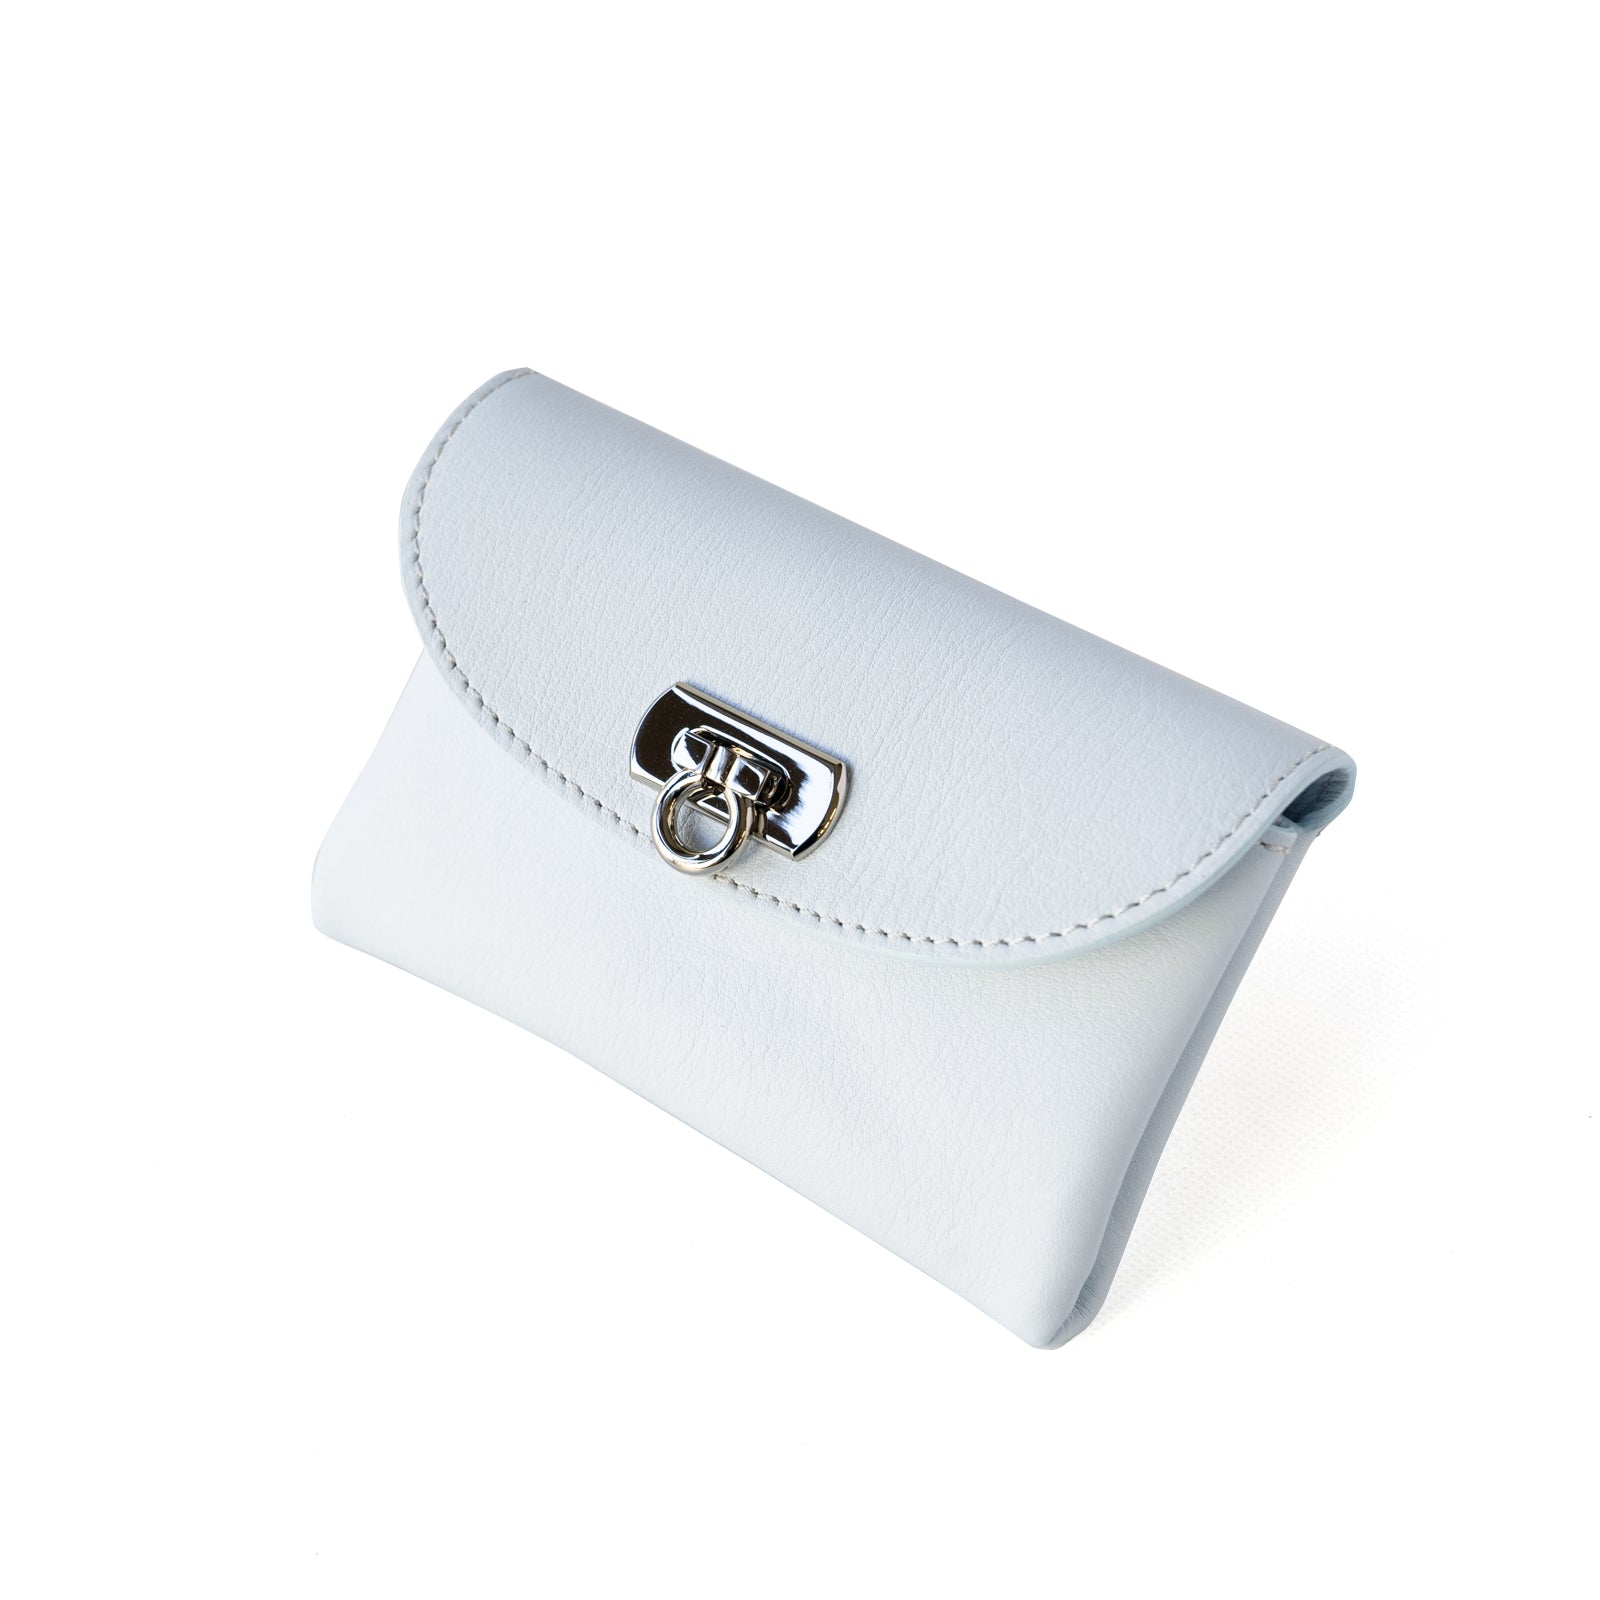 [6th Anniversary Sale] Soft Leather Flap Middle Wallet in Swift Leather / Blue Bloom